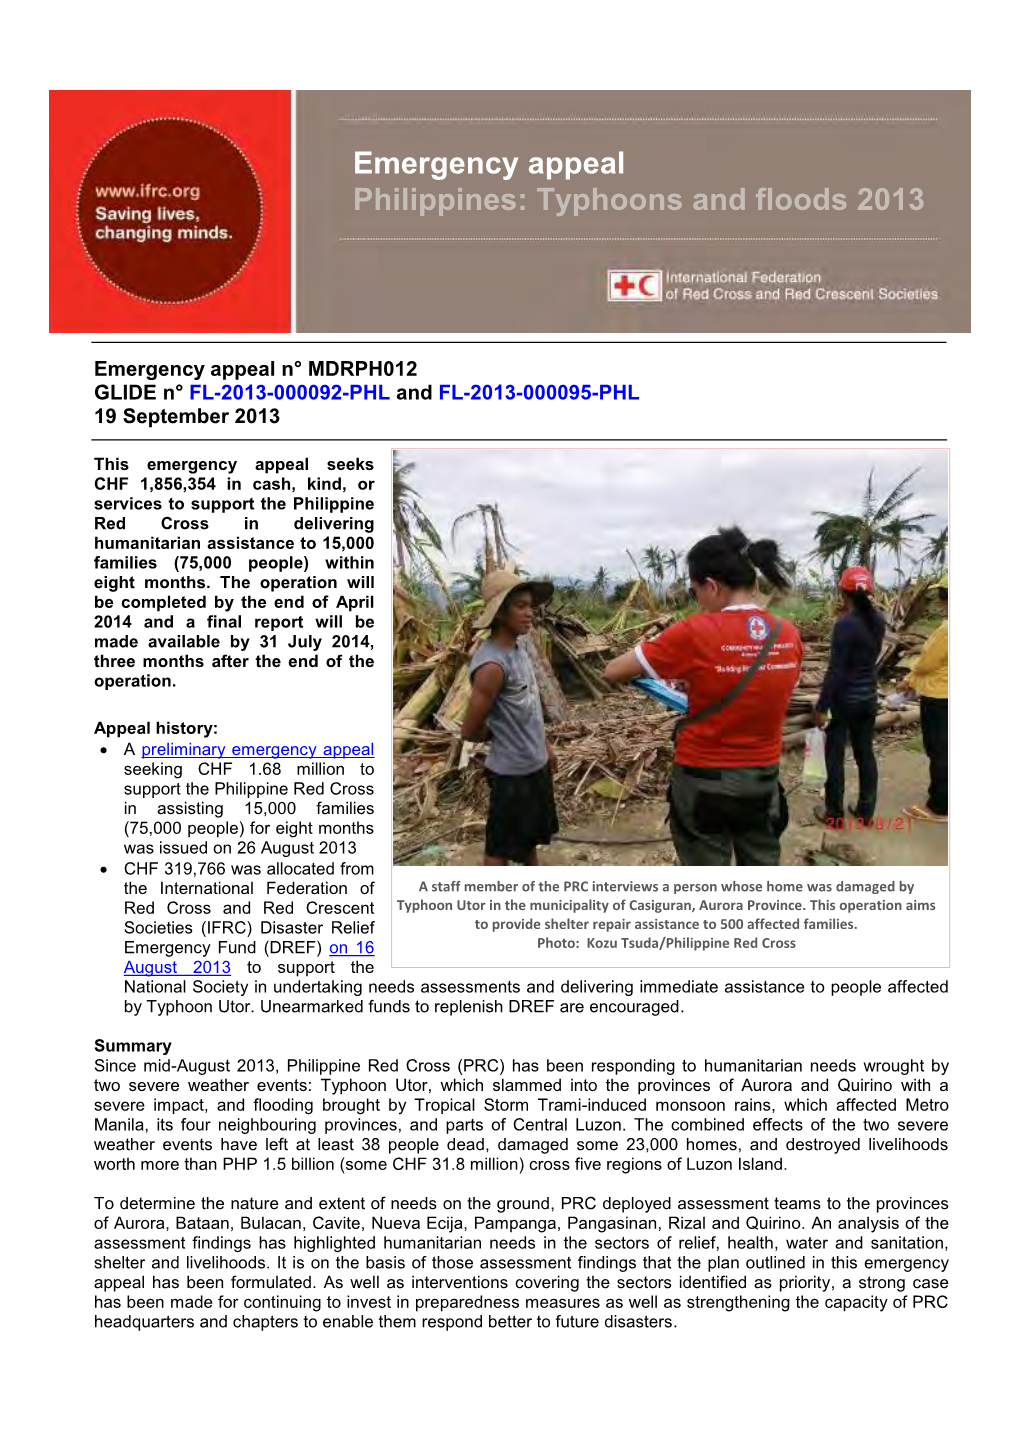 Emergency Appeal Philippines: Typhoons and Floods 2013